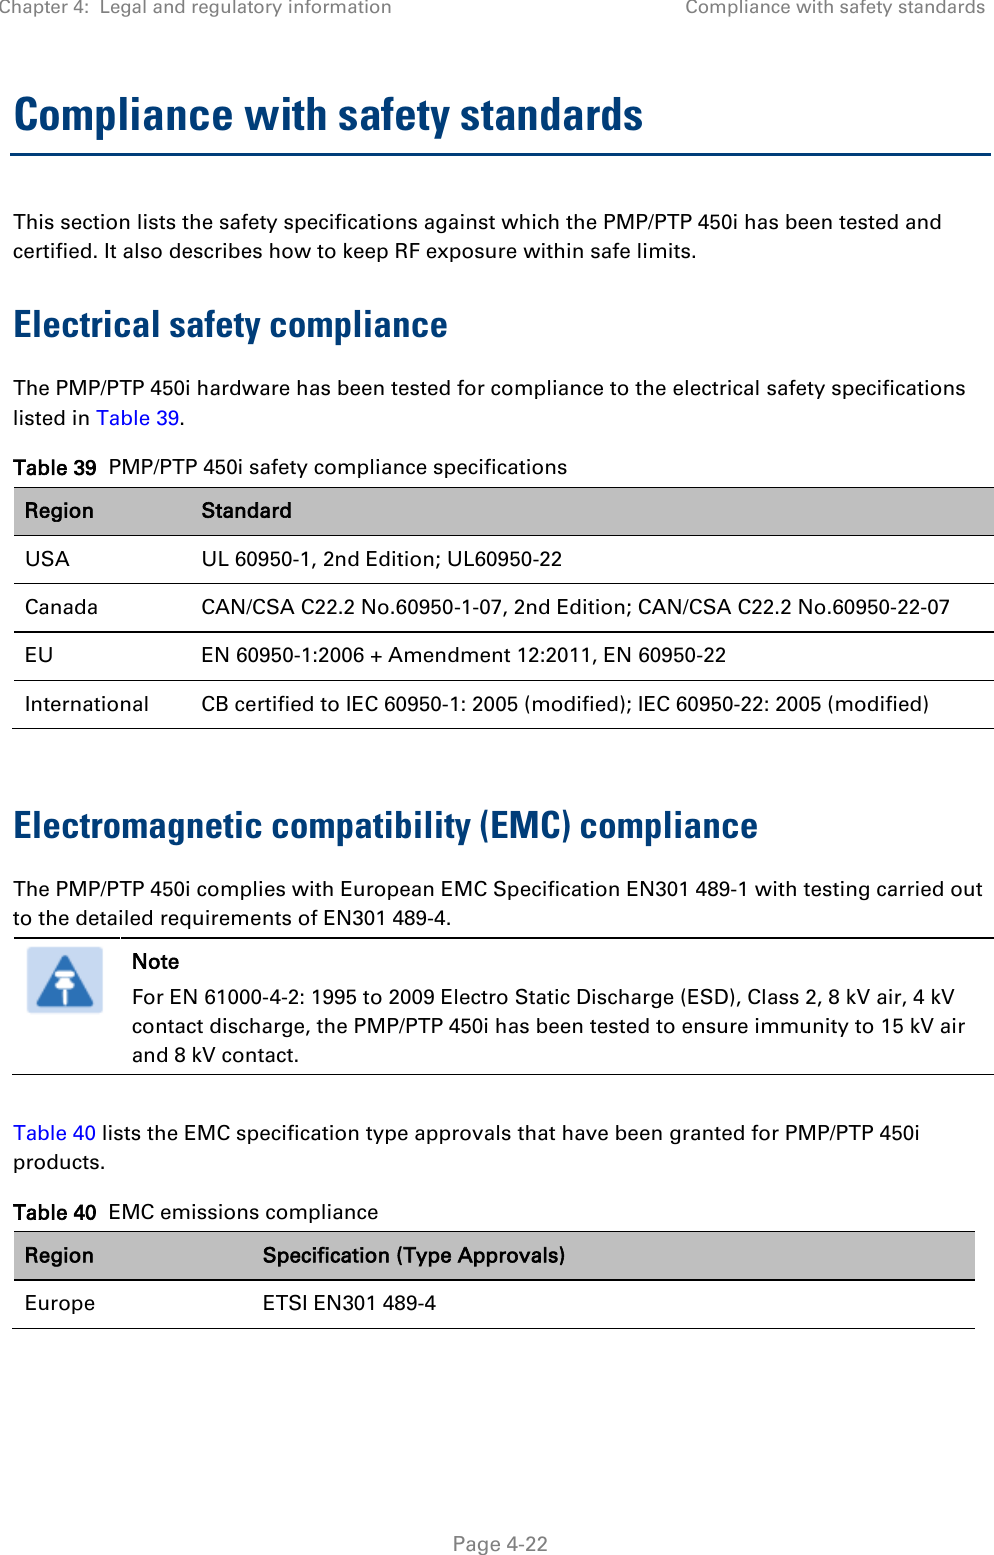 Chapter 4:  Legal and regulatory information Compliance with safety standards   Page 4-22 Compliance with safety standards This section lists the safety specifications against which the PMP/PTP 450i has been tested and certified. It also describes how to keep RF exposure within safe limits. Electrical safety compliance  The PMP/PTP 450i hardware has been tested for compliance to the electrical safety specifications listed in Table 39. Table 39  PMP/PTP 450i safety compliance specifications Region Standard USA UL 60950-1, 2nd Edition; UL60950-22 Canada CAN/CSA C22.2 No.60950-1-07, 2nd Edition; CAN/CSA C22.2 No.60950-22-07 EU EN 60950-1:2006 + Amendment 12:2011, EN 60950-22 International CB certified to IEC 60950-1: 2005 (modified); IEC 60950-22: 2005 (modified)  Electromagnetic compatibility (EMC) compliance The PMP/PTP 450i complies with European EMC Specification EN301 489-1 with testing carried out to the detailed requirements of EN301 489-4.   Note For EN 61000-4-2: 1995 to 2009 Electro Static Discharge (ESD), Class 2, 8 kV air, 4 kV contact discharge, the PMP/PTP 450i has been tested to ensure immunity to 15 kV air and 8 kV contact.  Table 40 lists the EMC specification type approvals that have been granted for PMP/PTP 450i products. Table 40  EMC emissions compliance Region Specification (Type Approvals) Europe ETSI EN301 489-4  